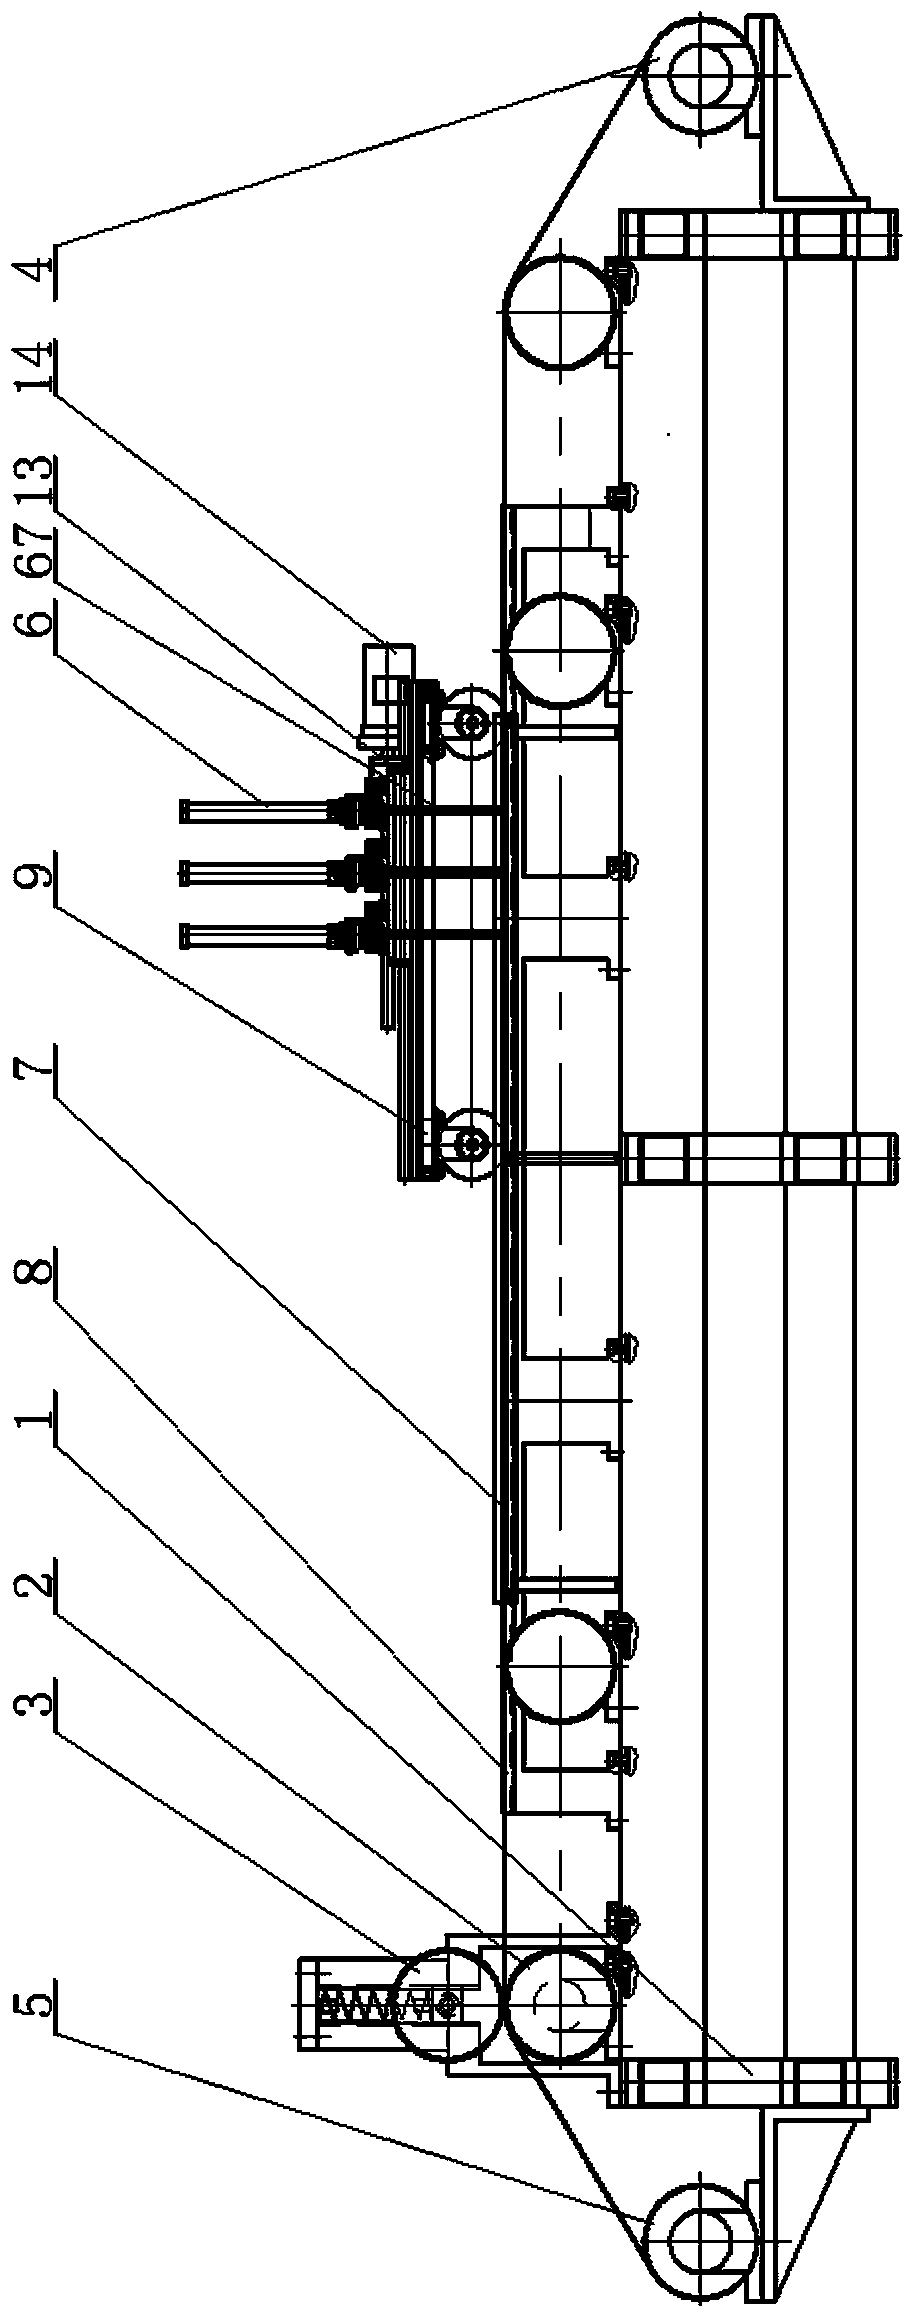 Automatic pattern pasting and pressing device for cloth